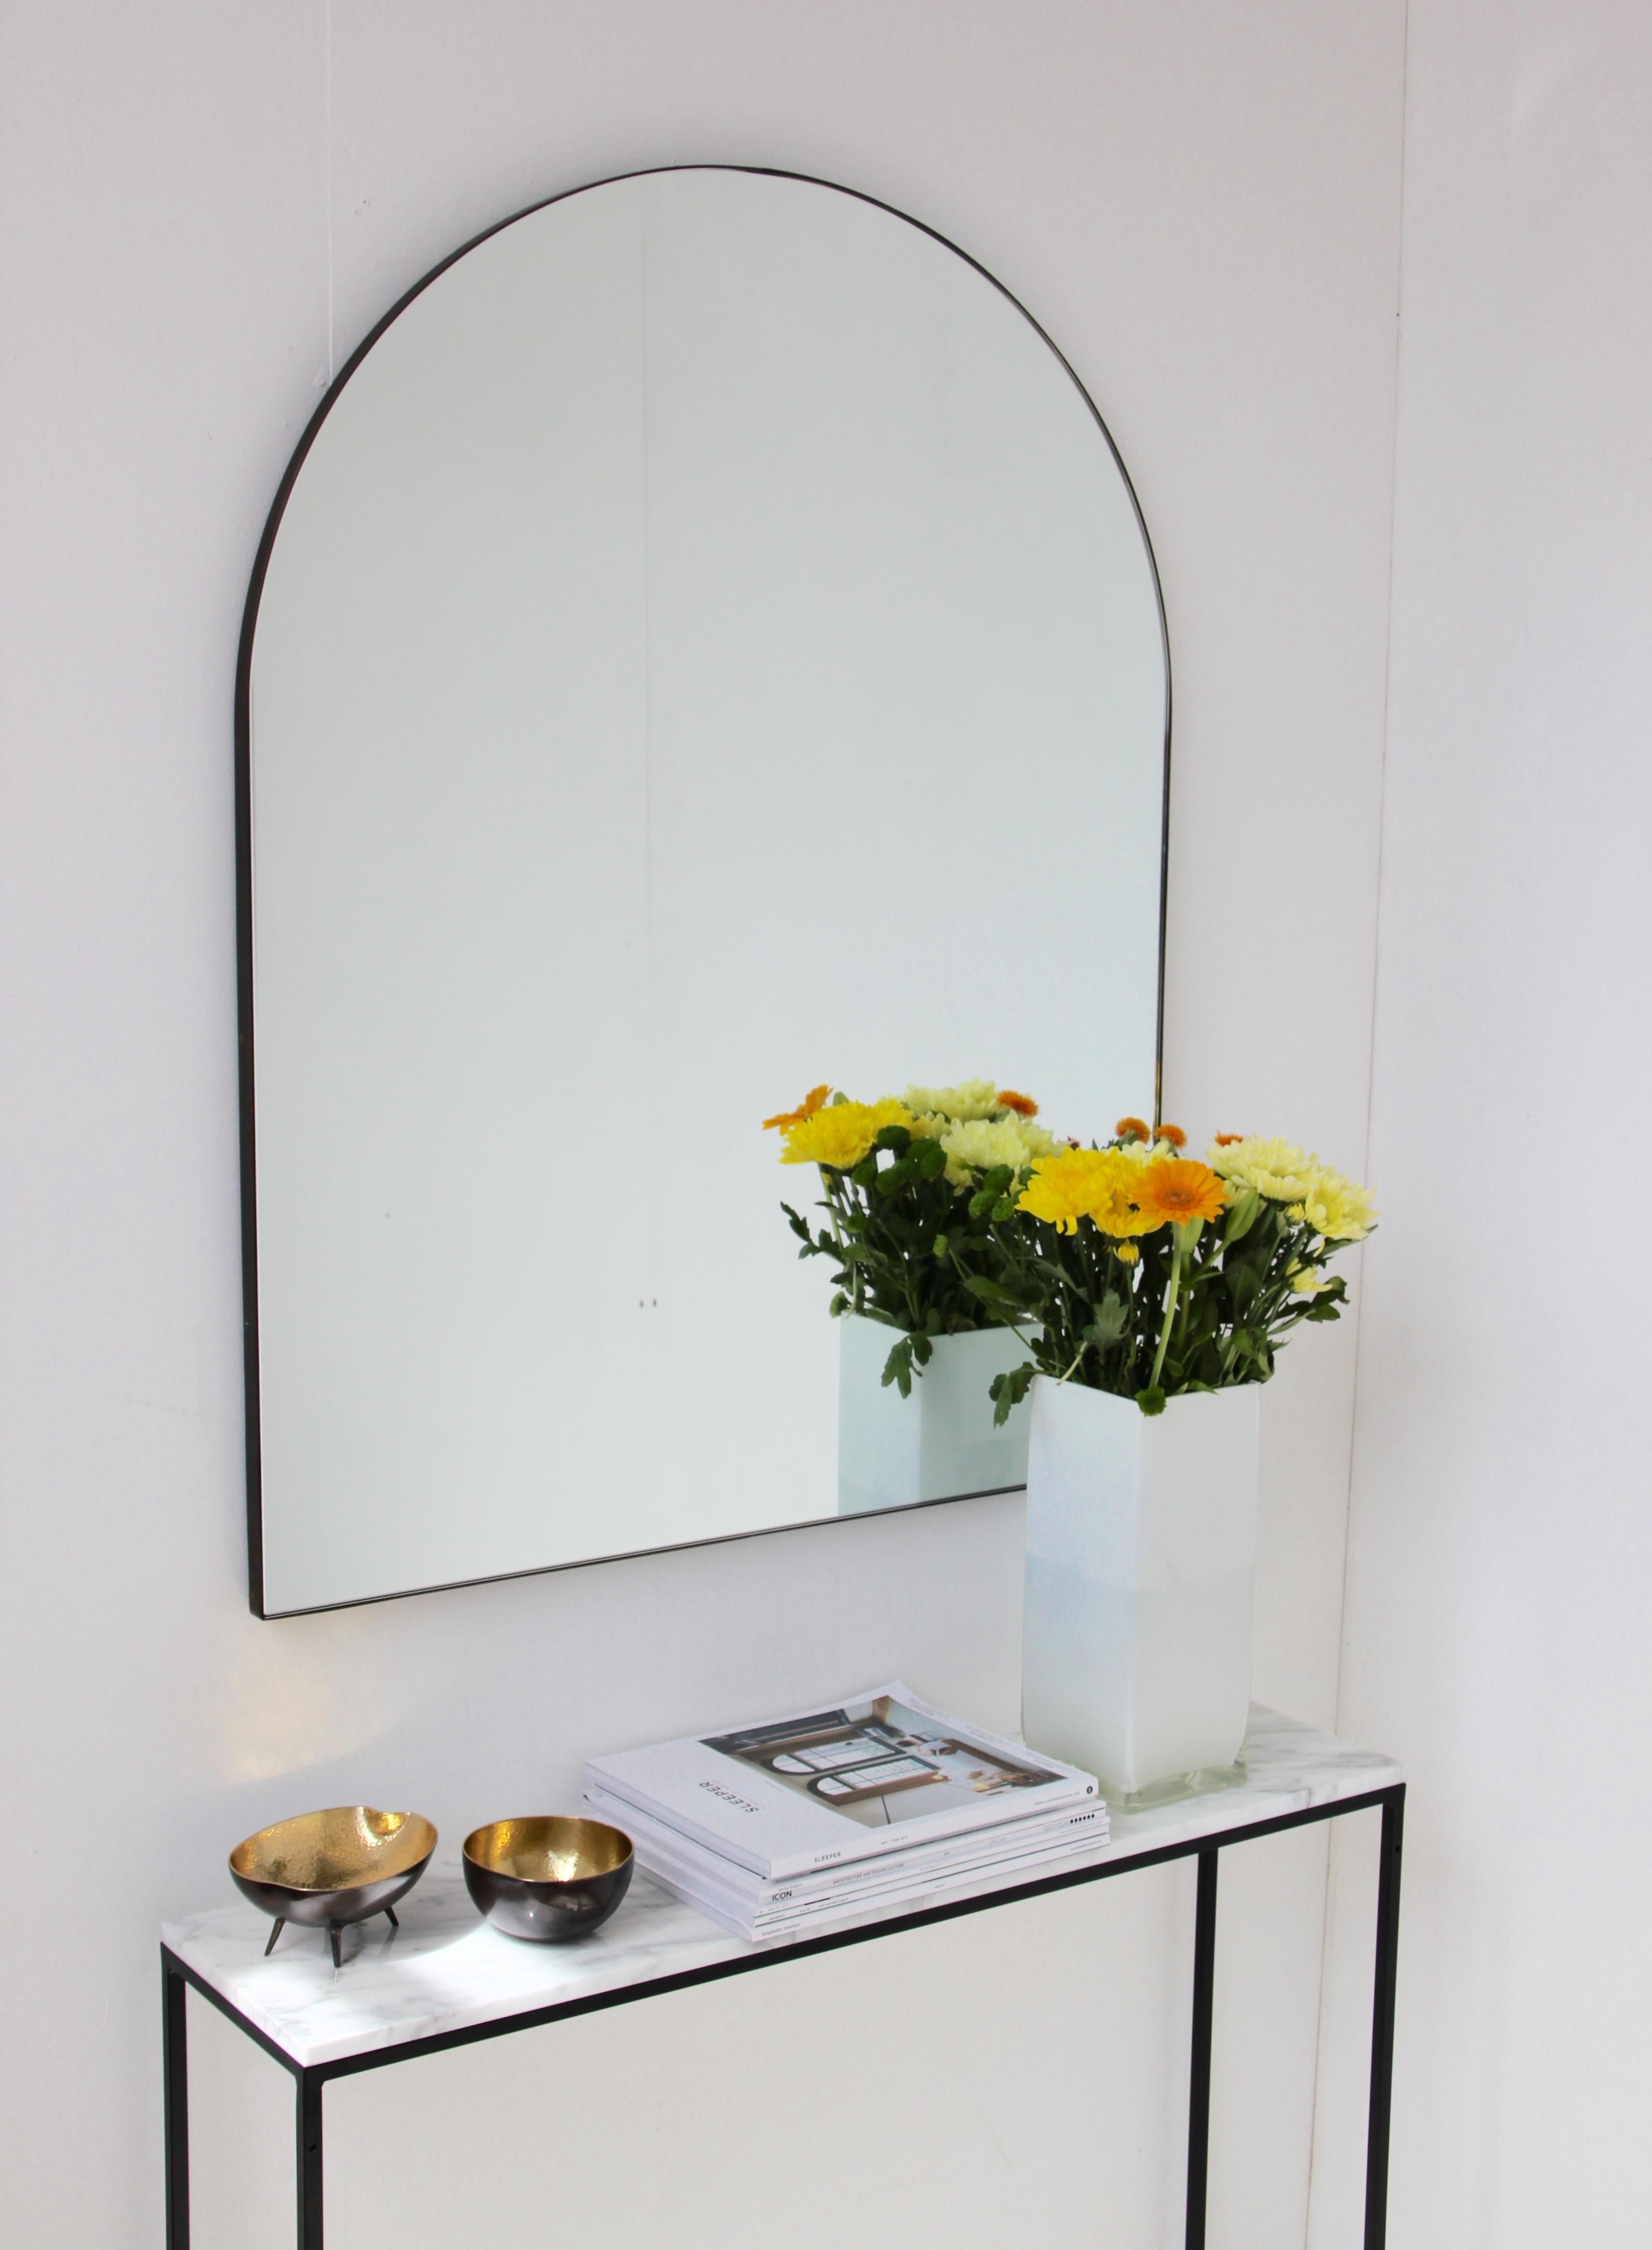 Delightful handcrafted overmantel Arcus™ arched mirror with a bronze patina brass frame. Designed and handcrafted in London, UK.

Fitted with an ingenious French cleat (split batten) system so they may hang flush with the wall. A Z bar system is